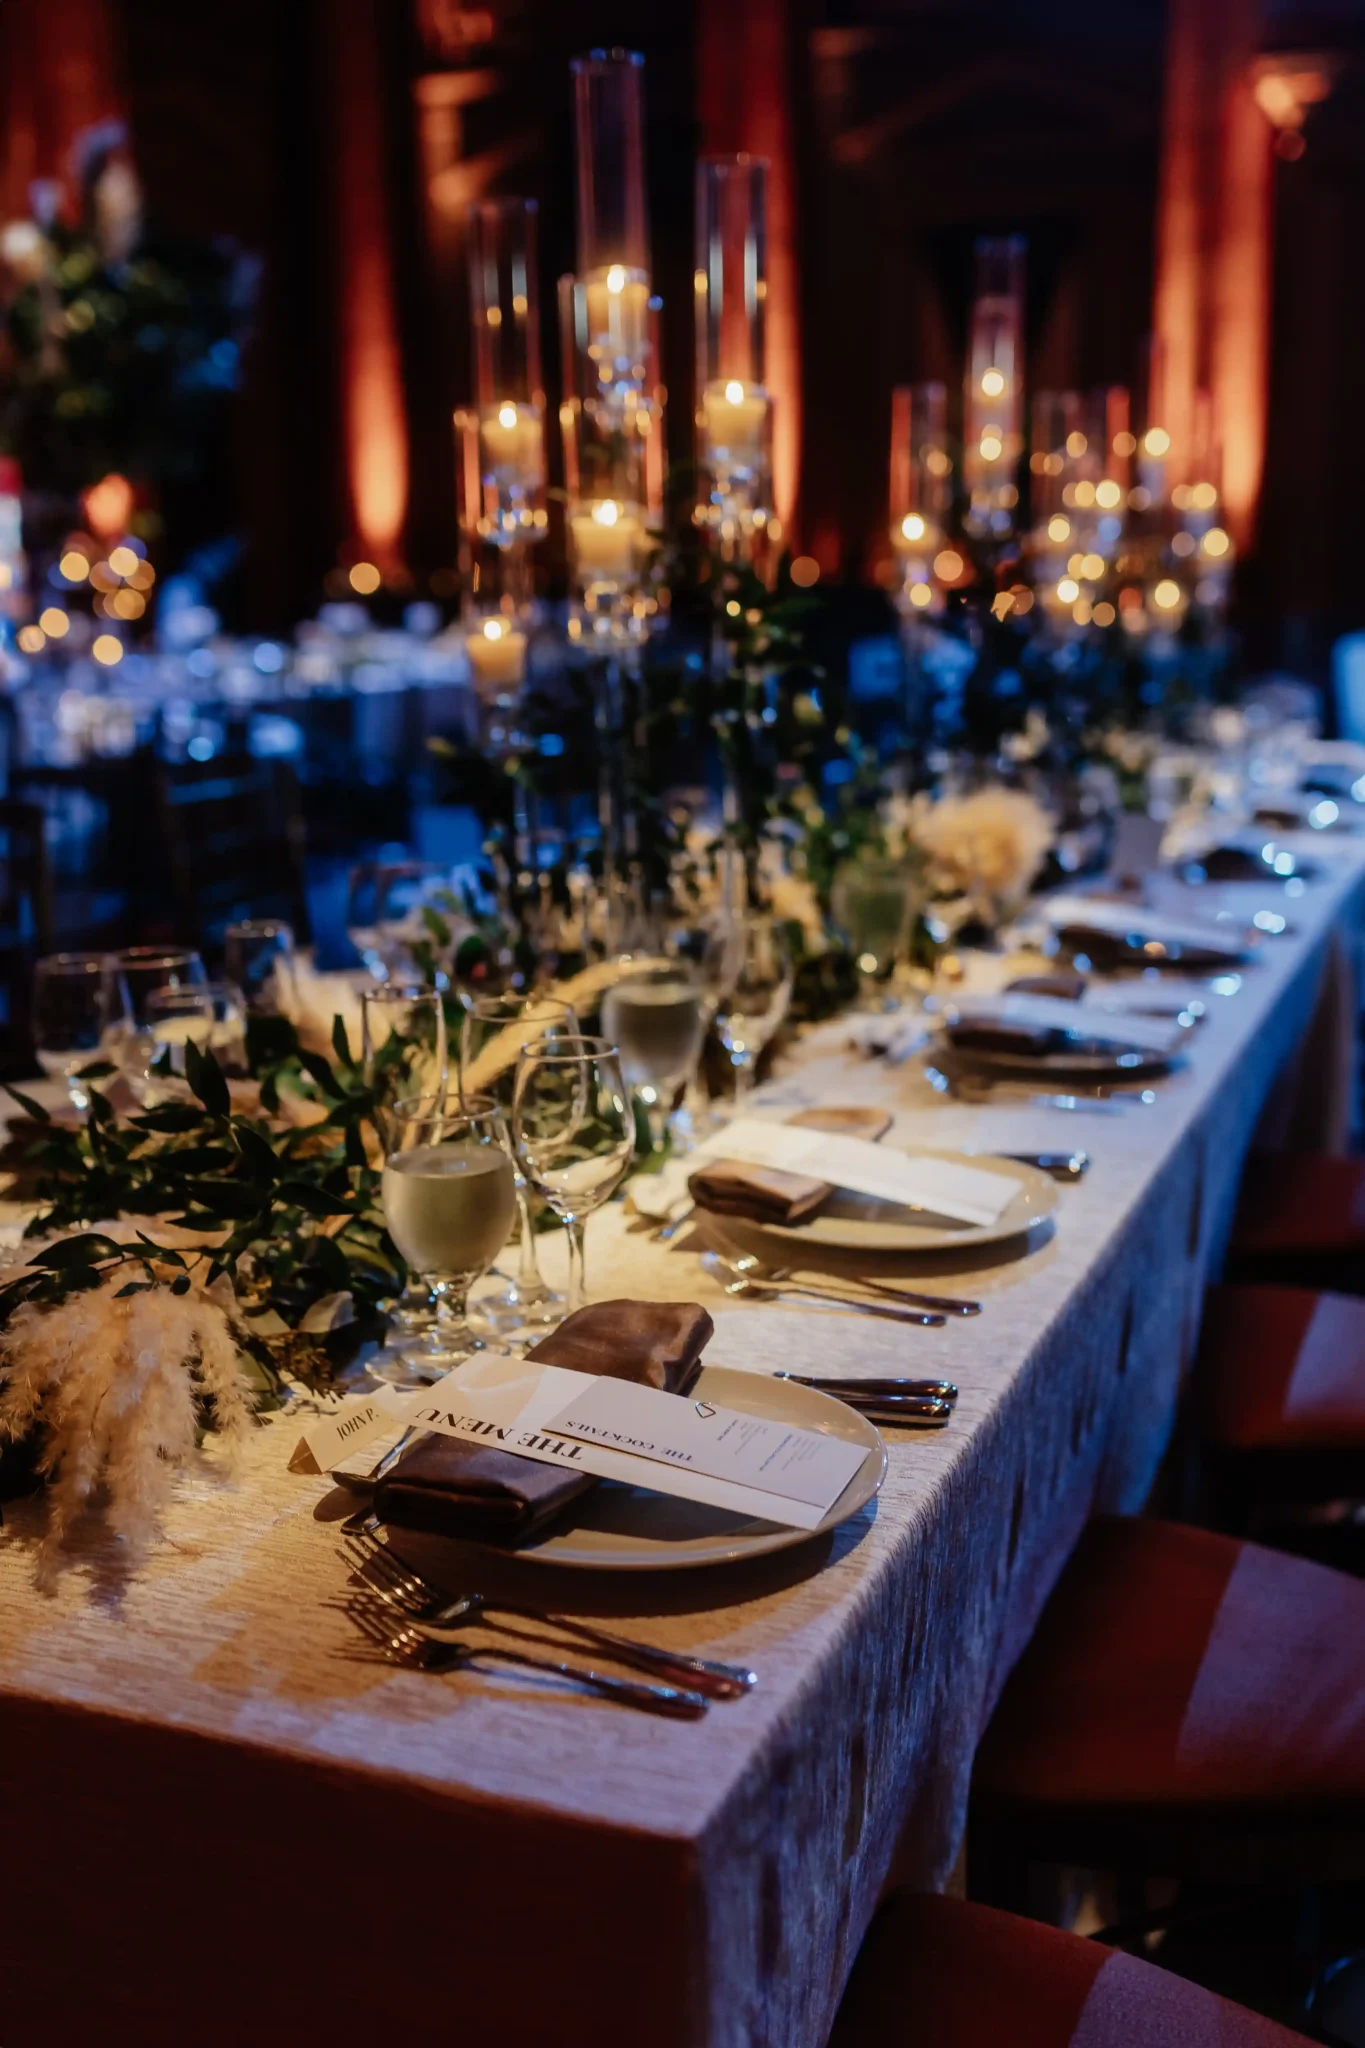 A table set with candles and greenery.